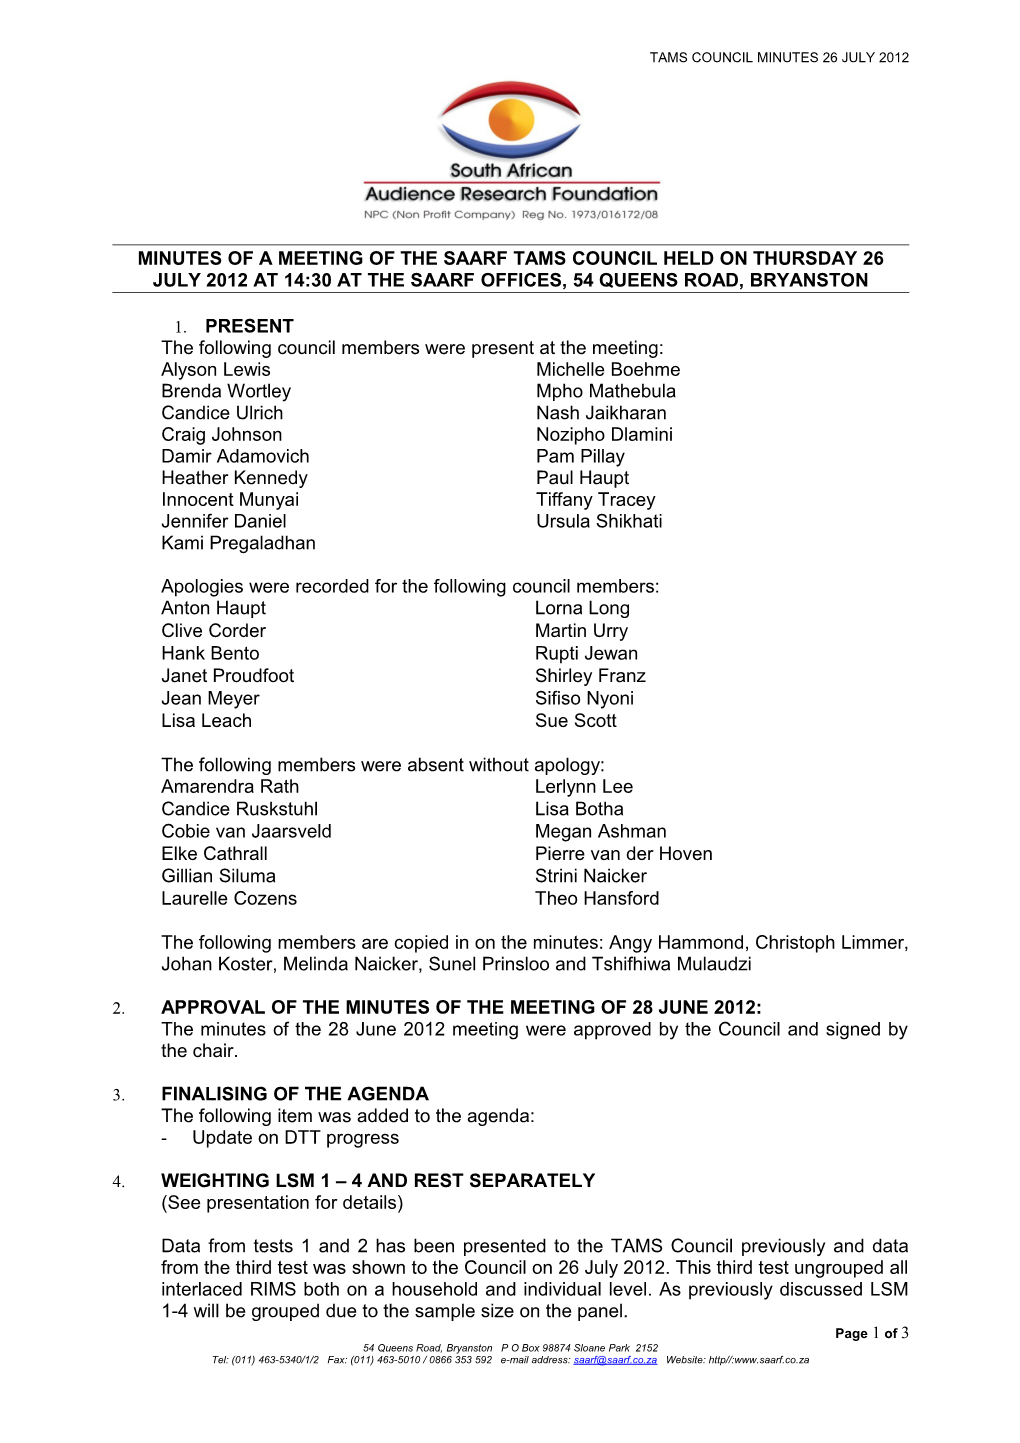 The Following Council Members Were Present at the Meeting